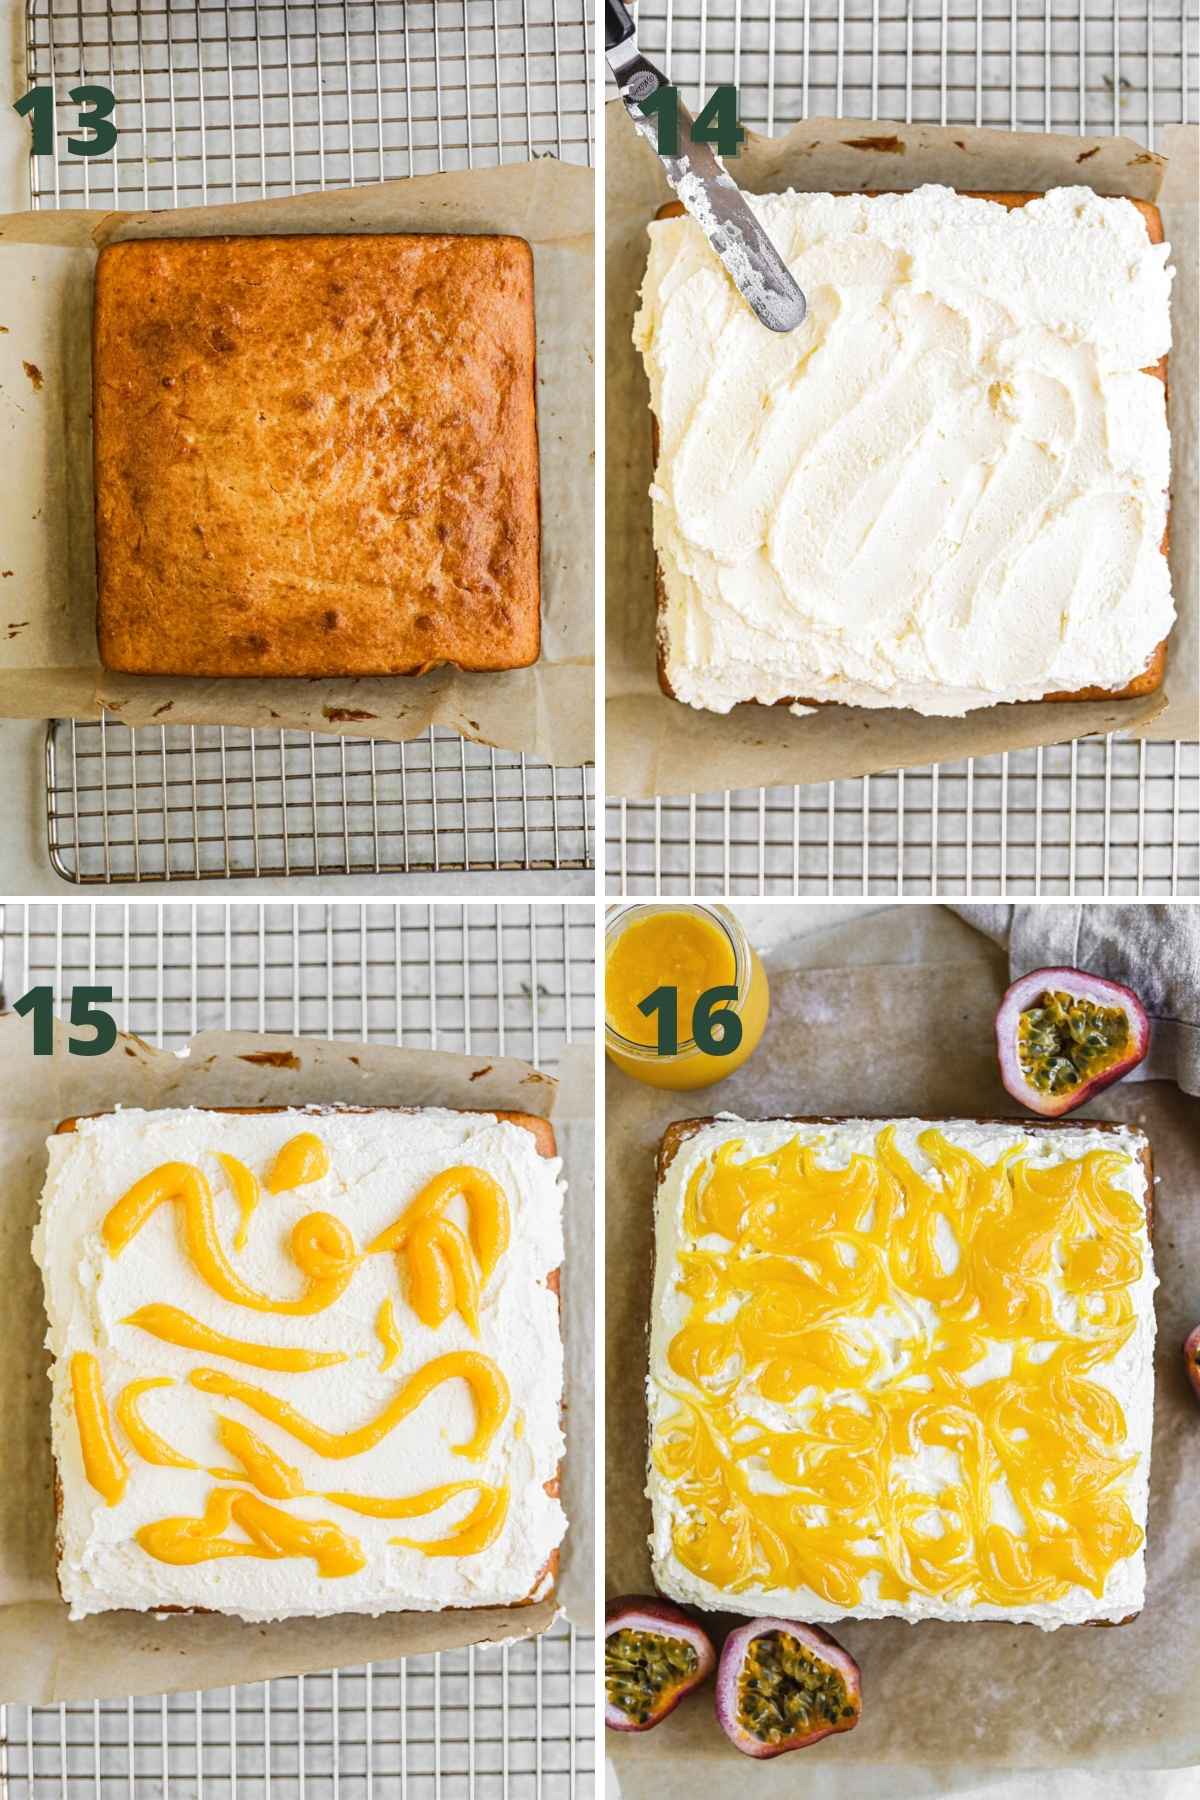 Steps to make passion fruit cake, let cake cool; top with frosting; swirl passion fruit curd on top.